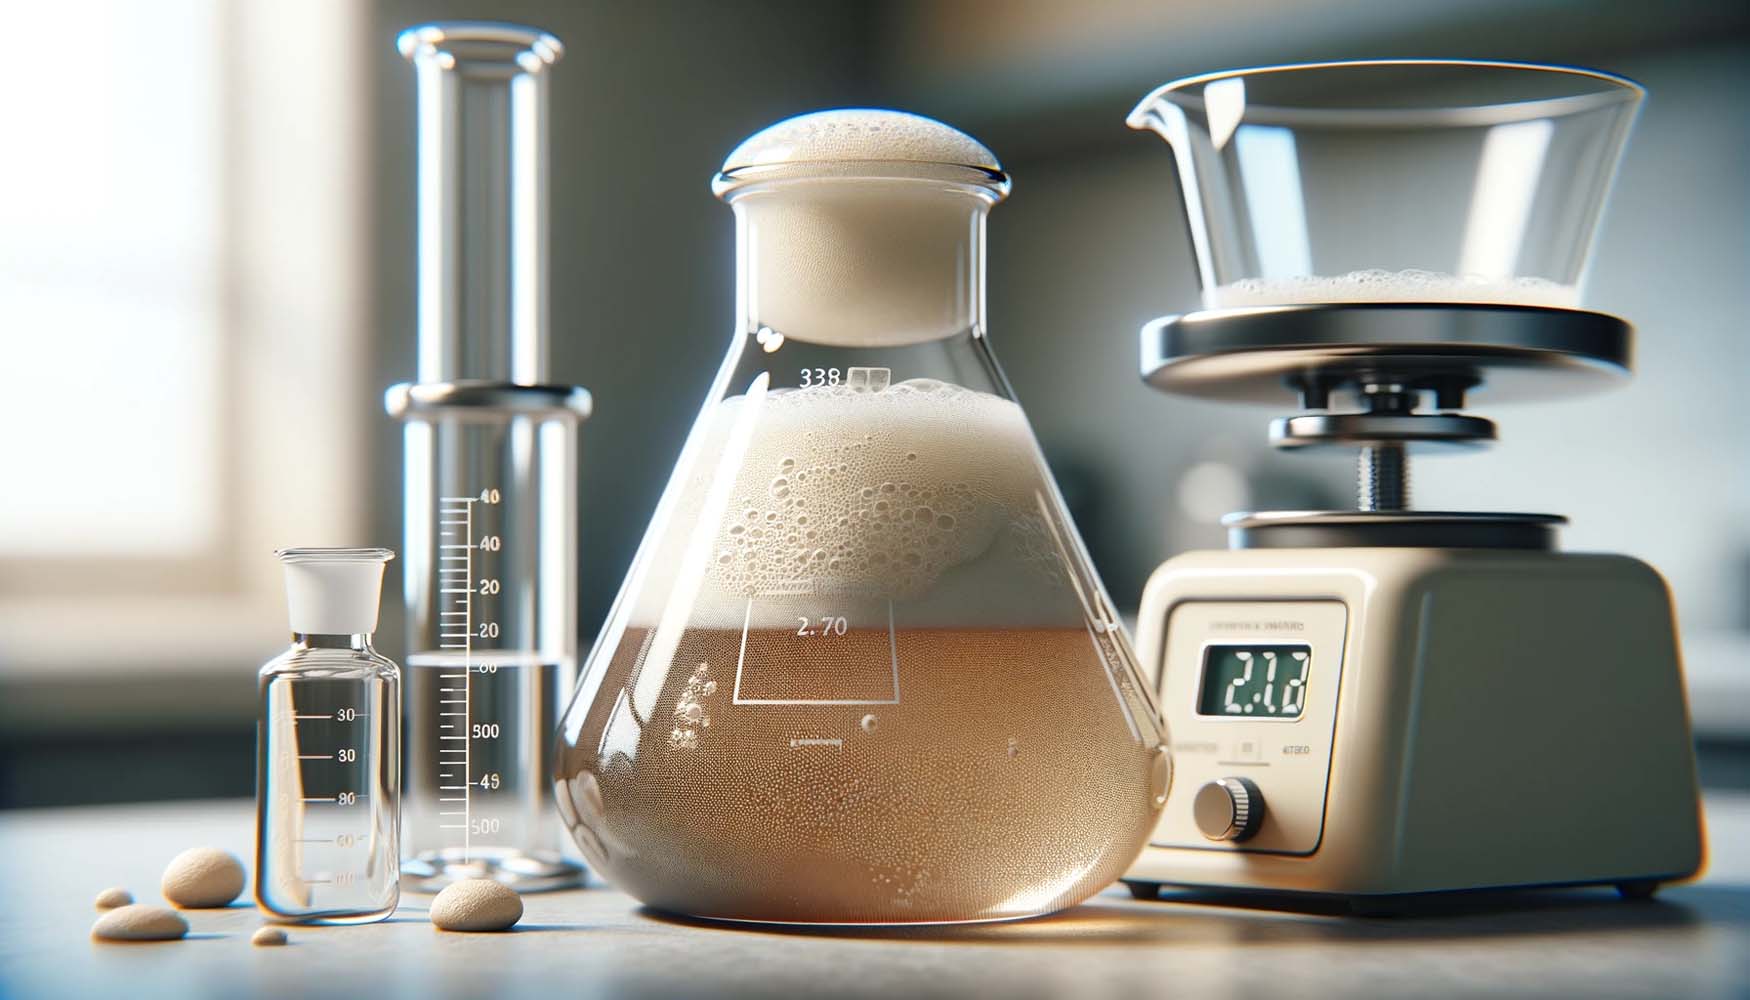 How to Make a Yeast Starter: A Step-by-Step Guide